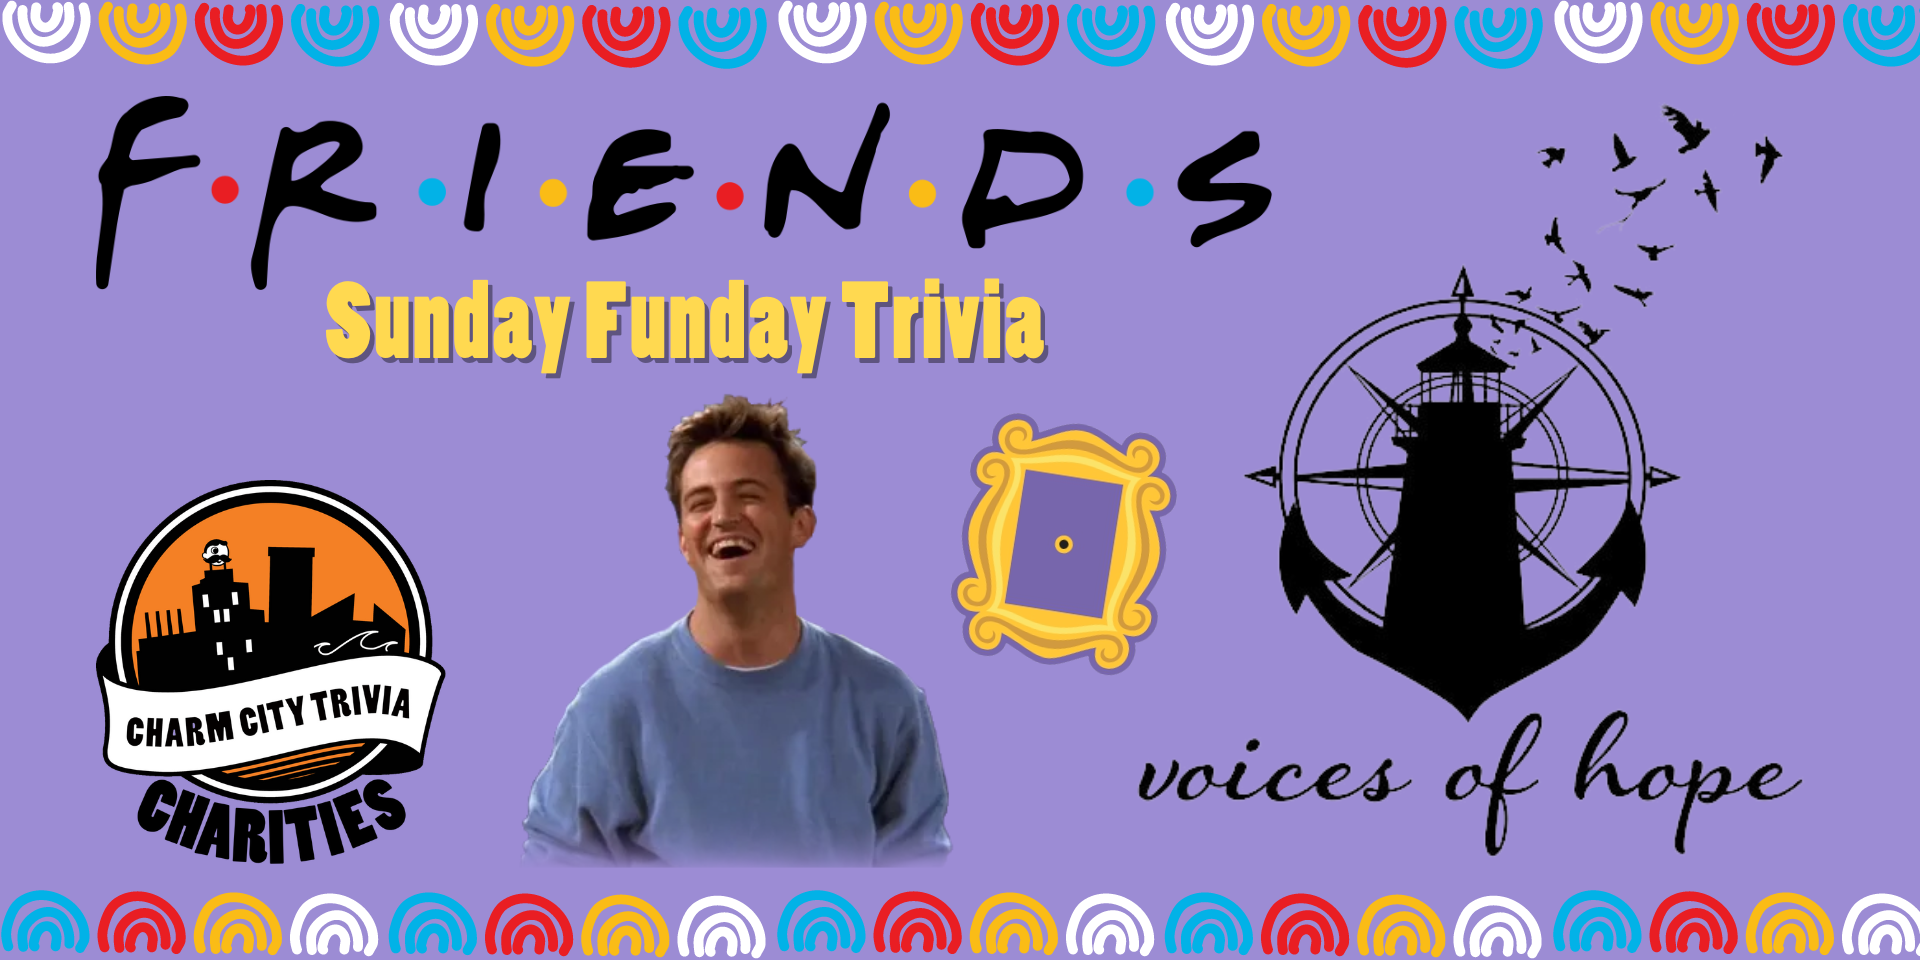 a light purple background with a colorful border, the Charm City Trivia Charities logo, the Voices for Hope logo, the picture frame from Friends, a photo of Chandler, the Friends logo, and yellow text. The text reads: Sunday Funday Trivia